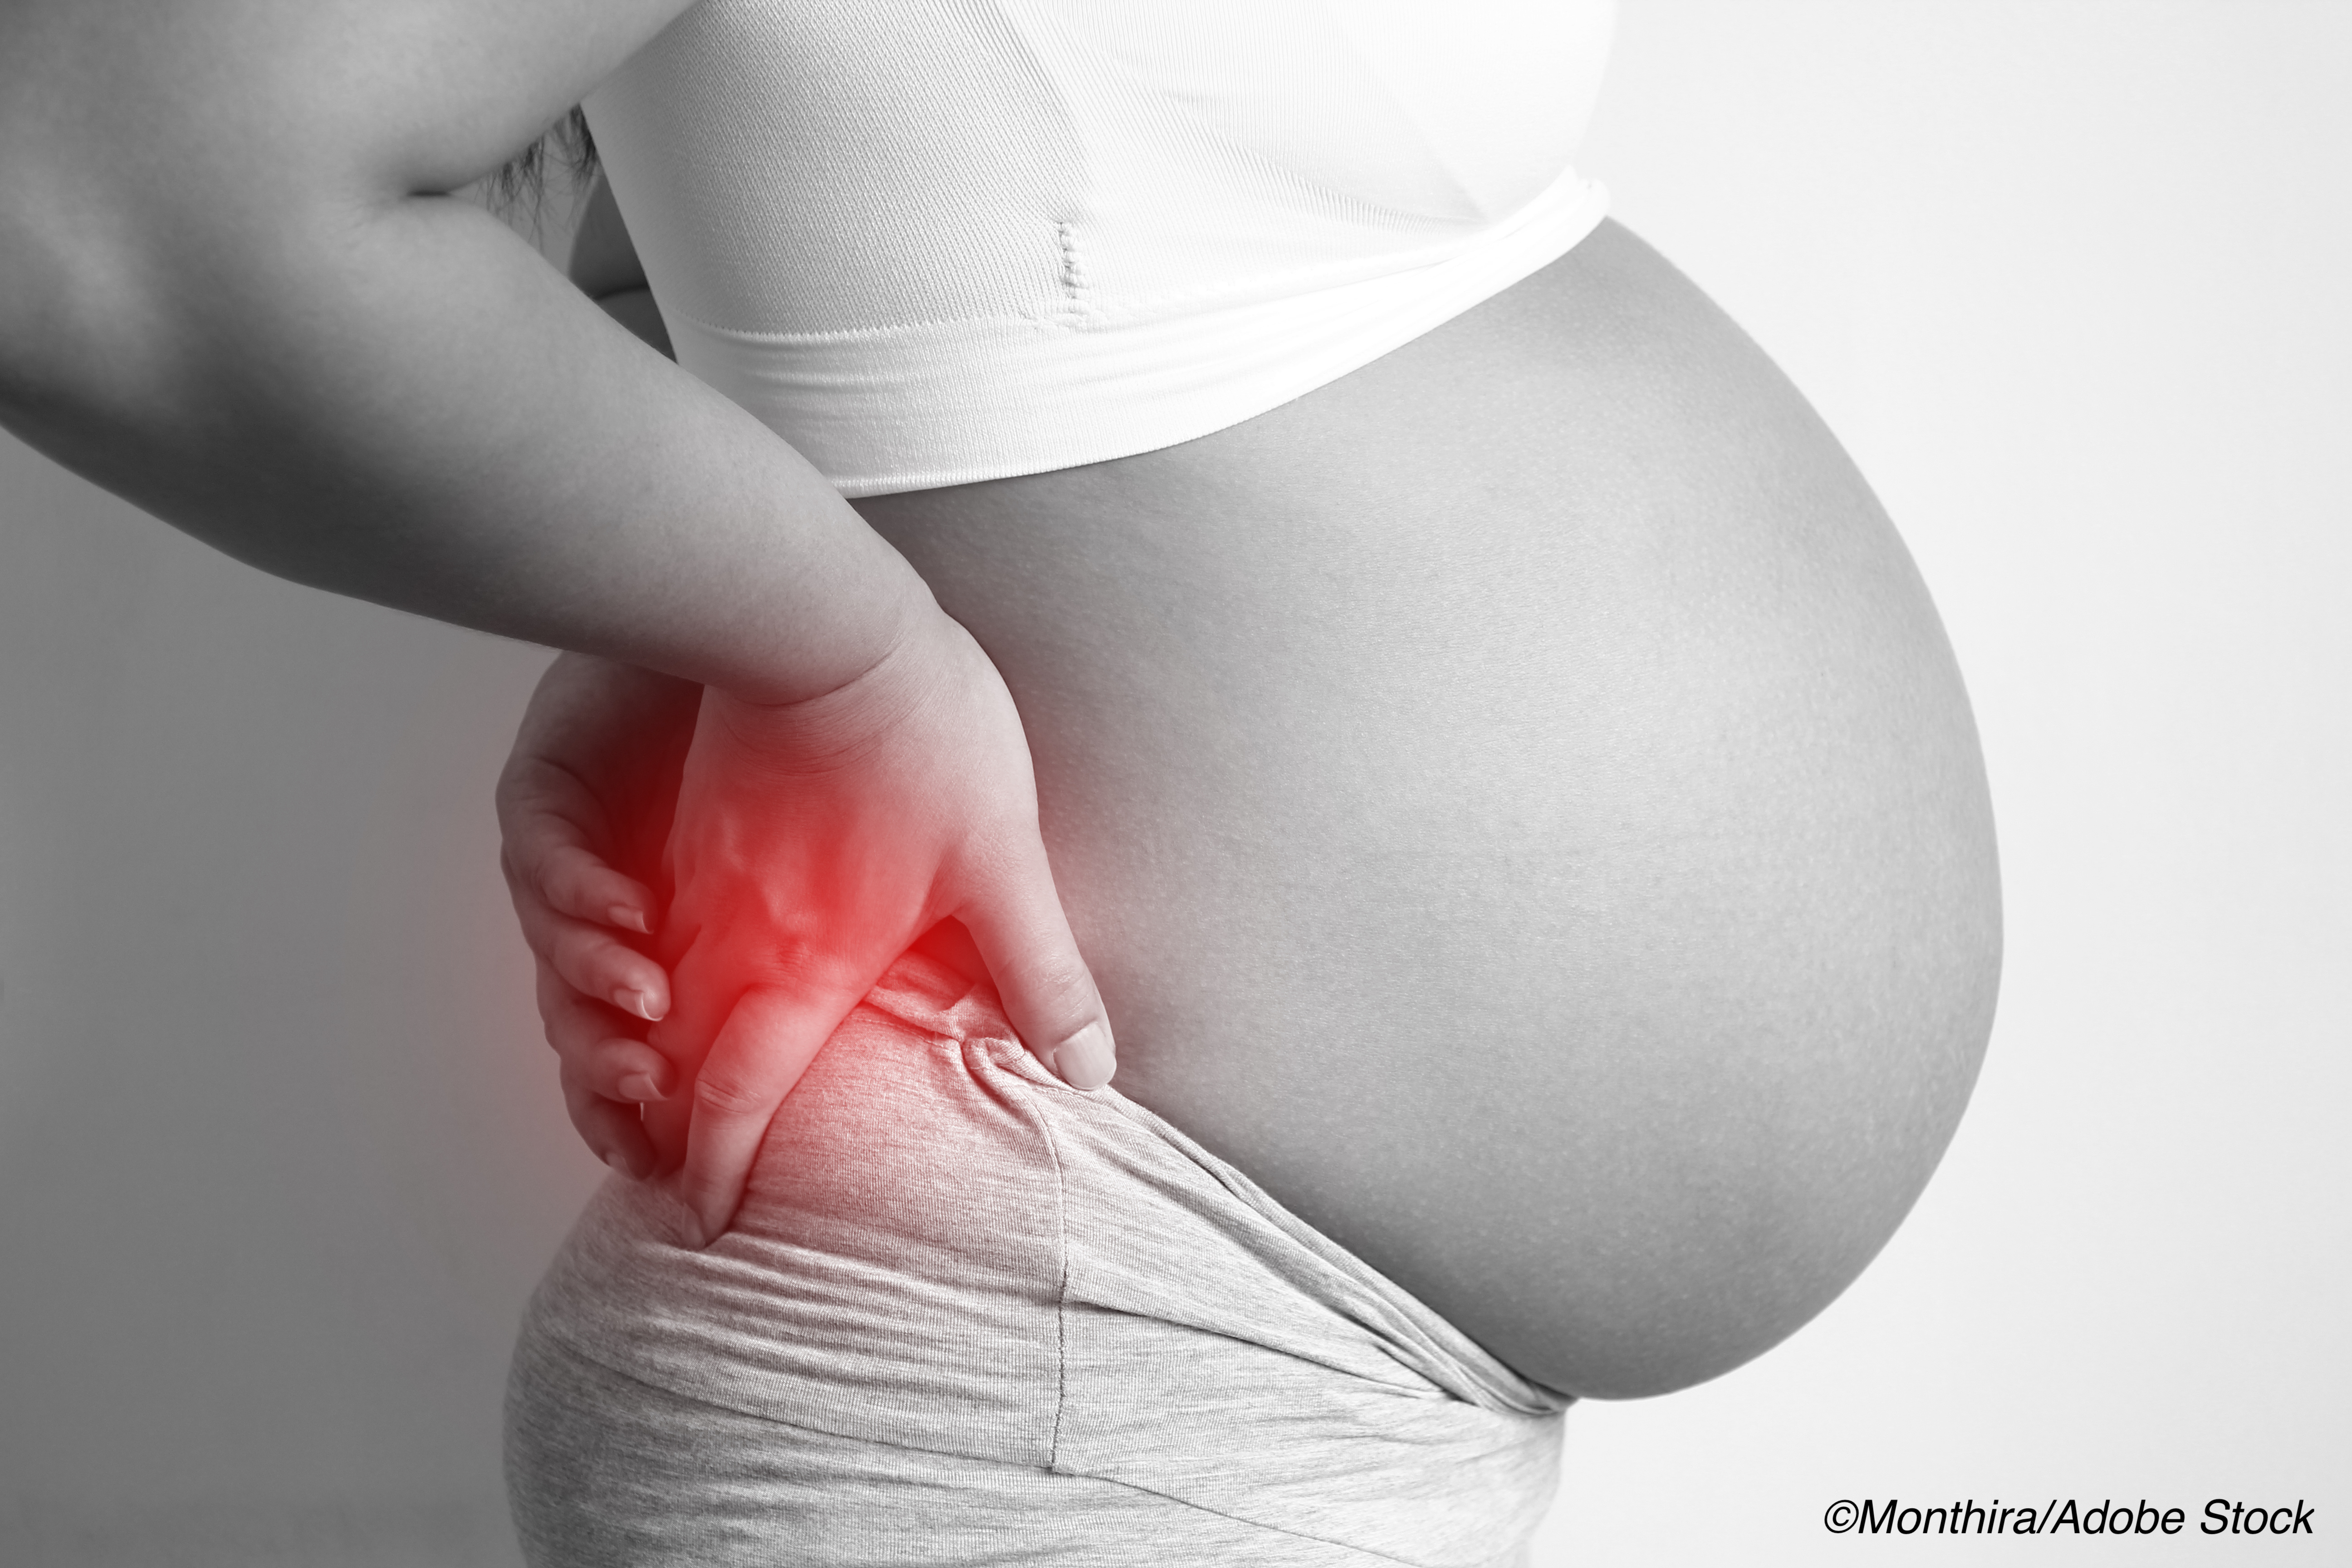 Kidney Stones—A Consequence of Pregnancy?